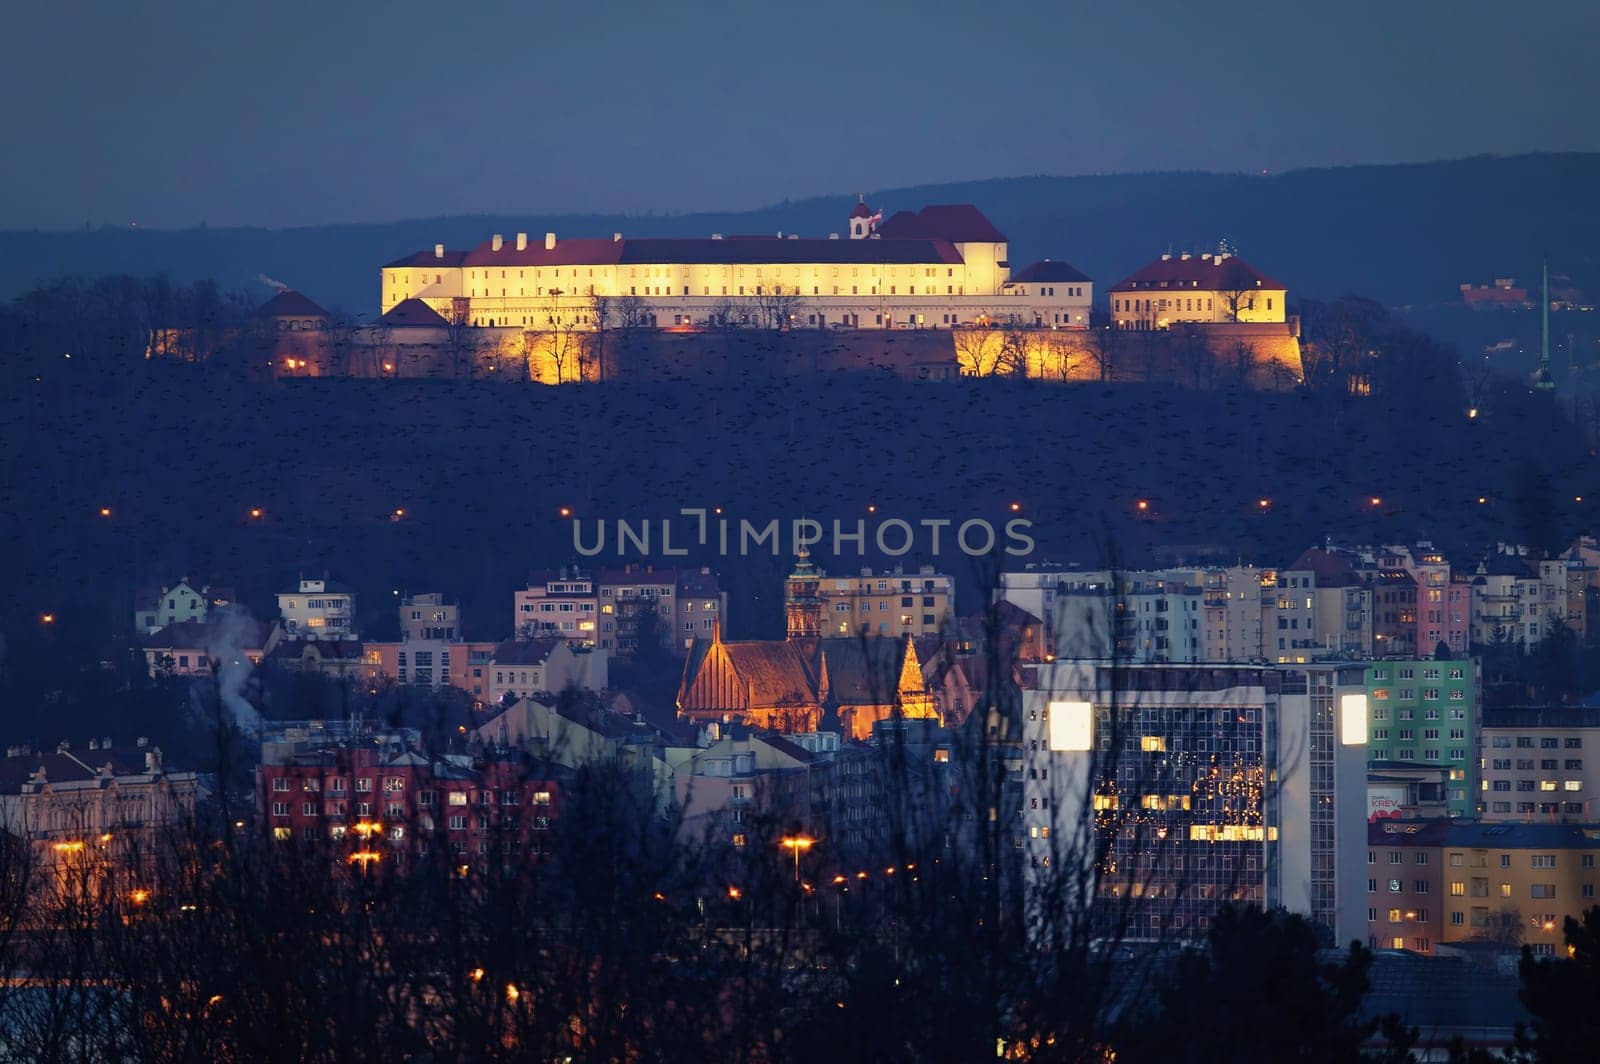 City Brno - Czech Republic - Europe. Spilberk - beautiful old castle and fortress forming the dominant of the city of Brno. by Montypeter